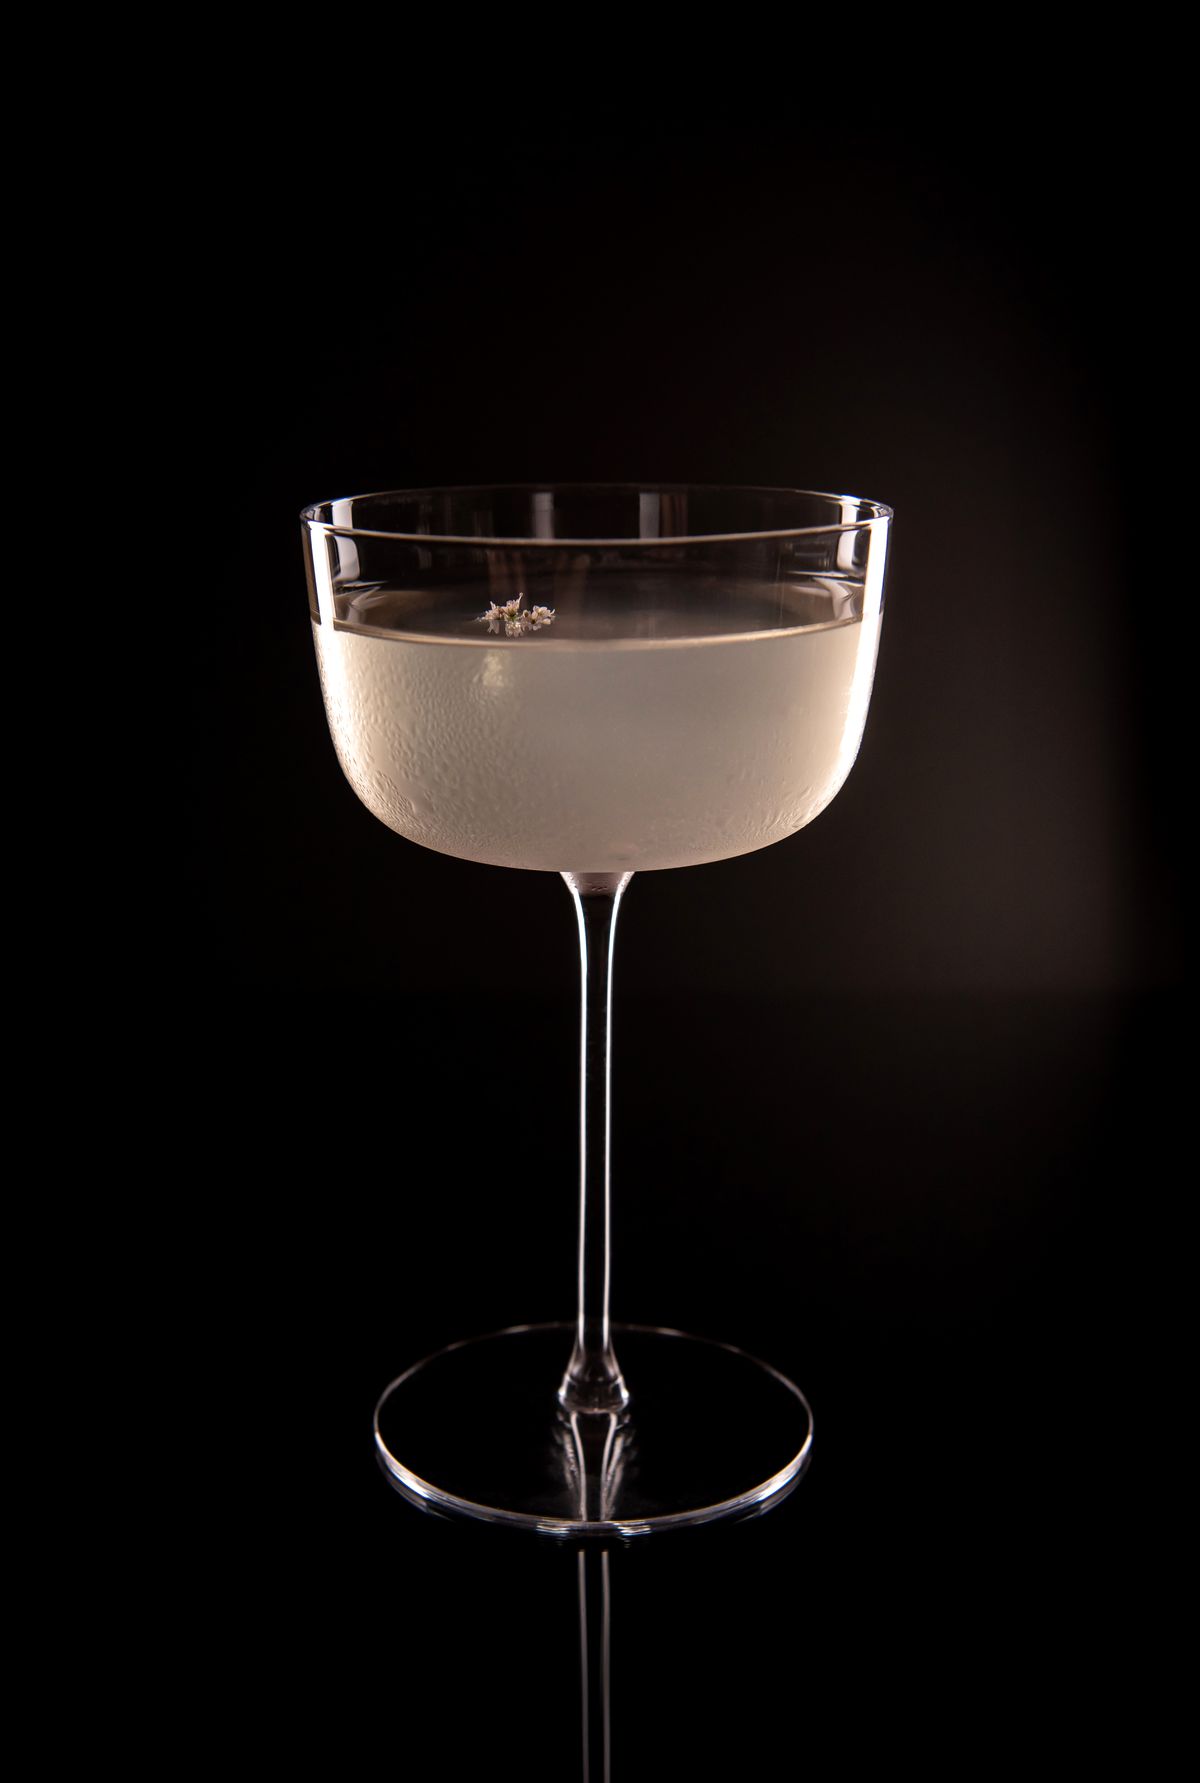 A tall, long-stemmed cocktail glass filled with a clear liquid.